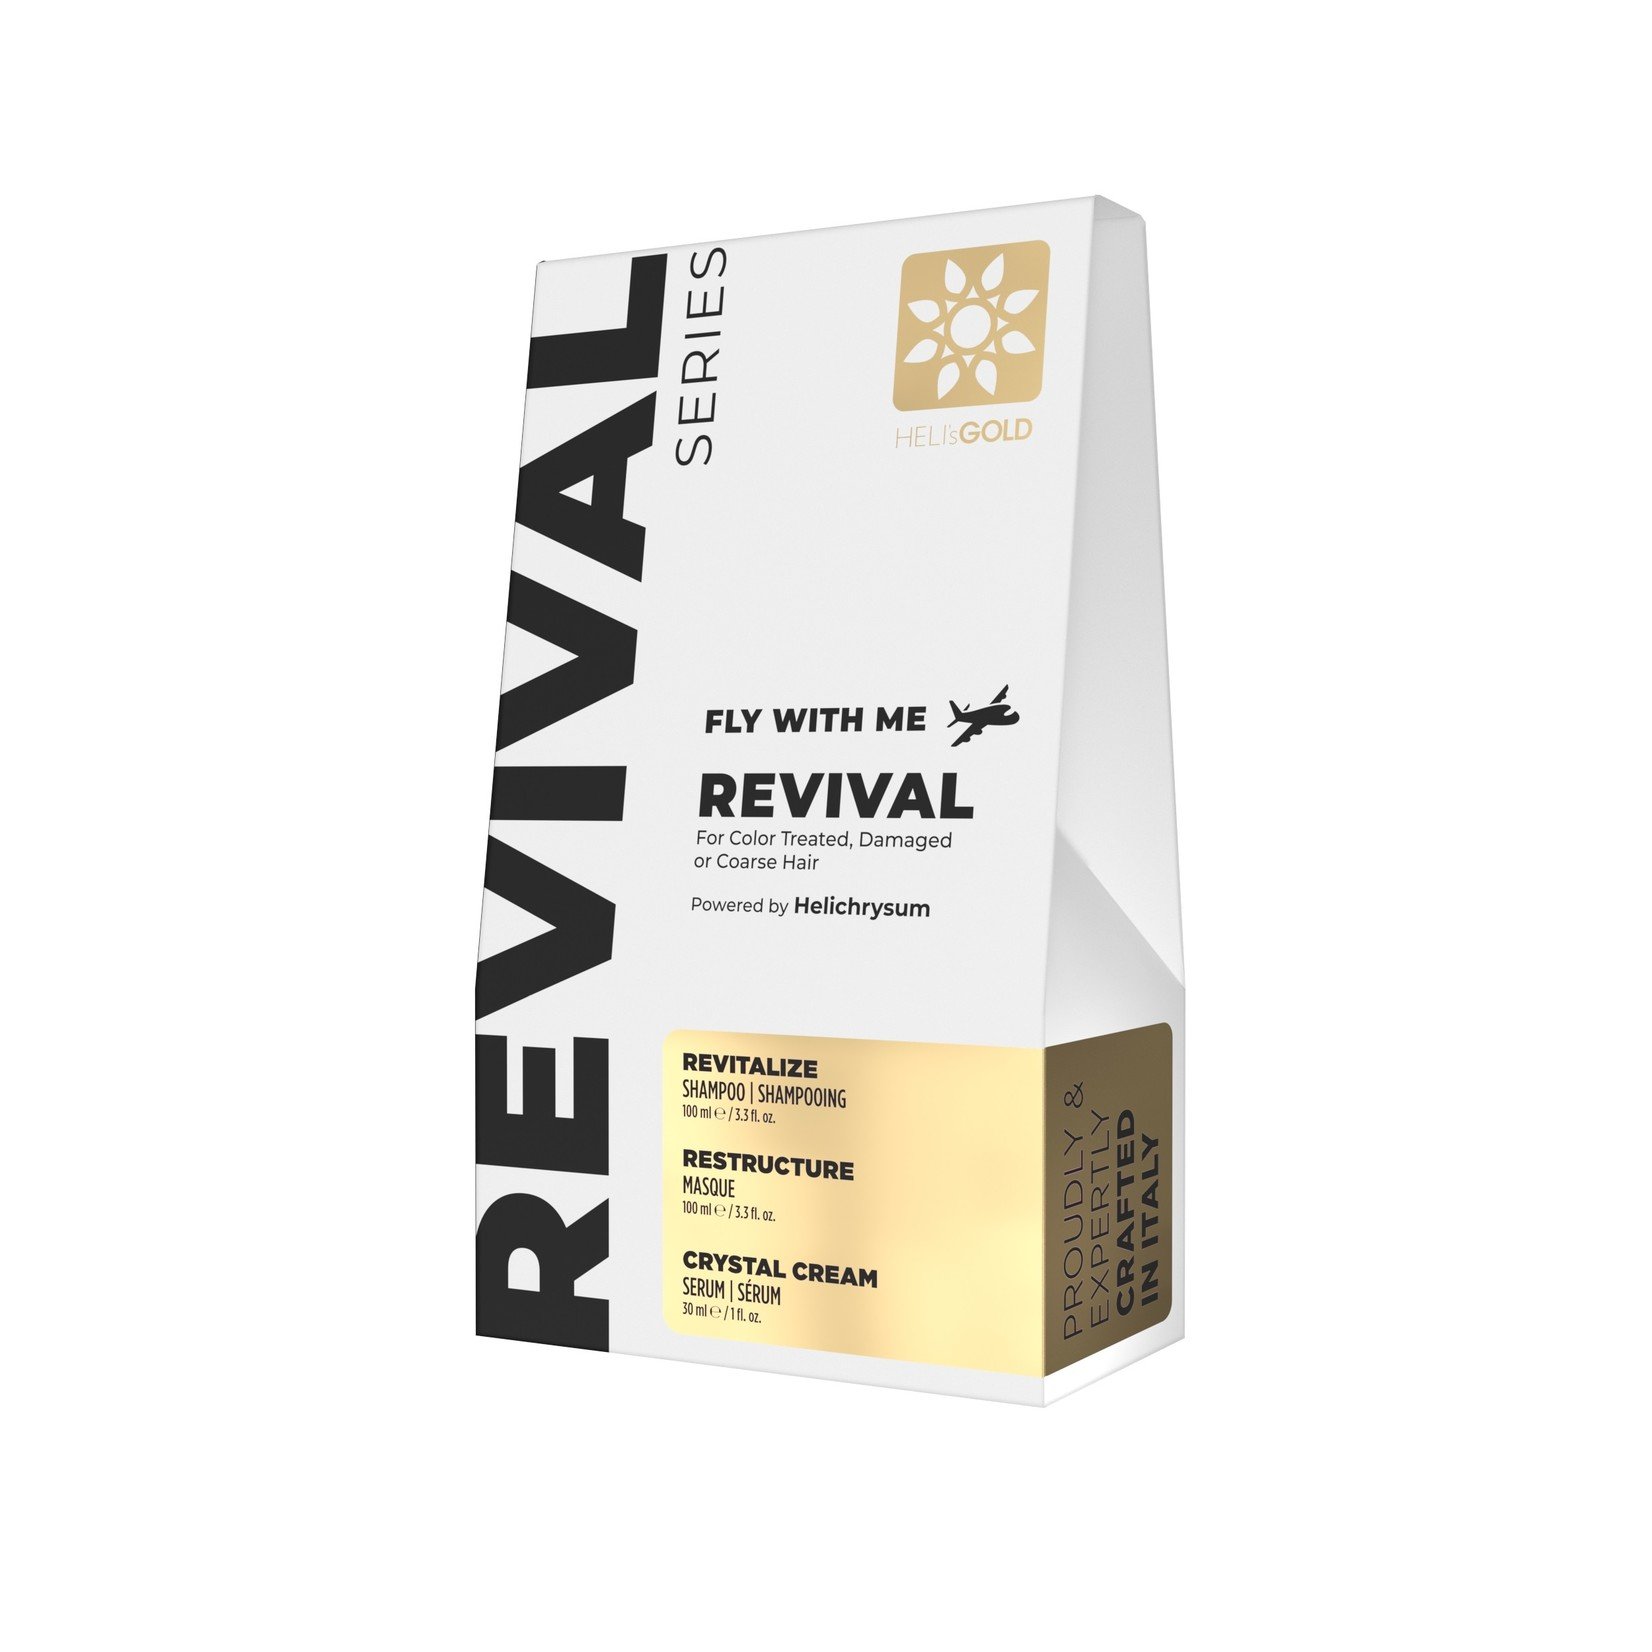 Heli's Gold Revival Series Fly with Me Kit